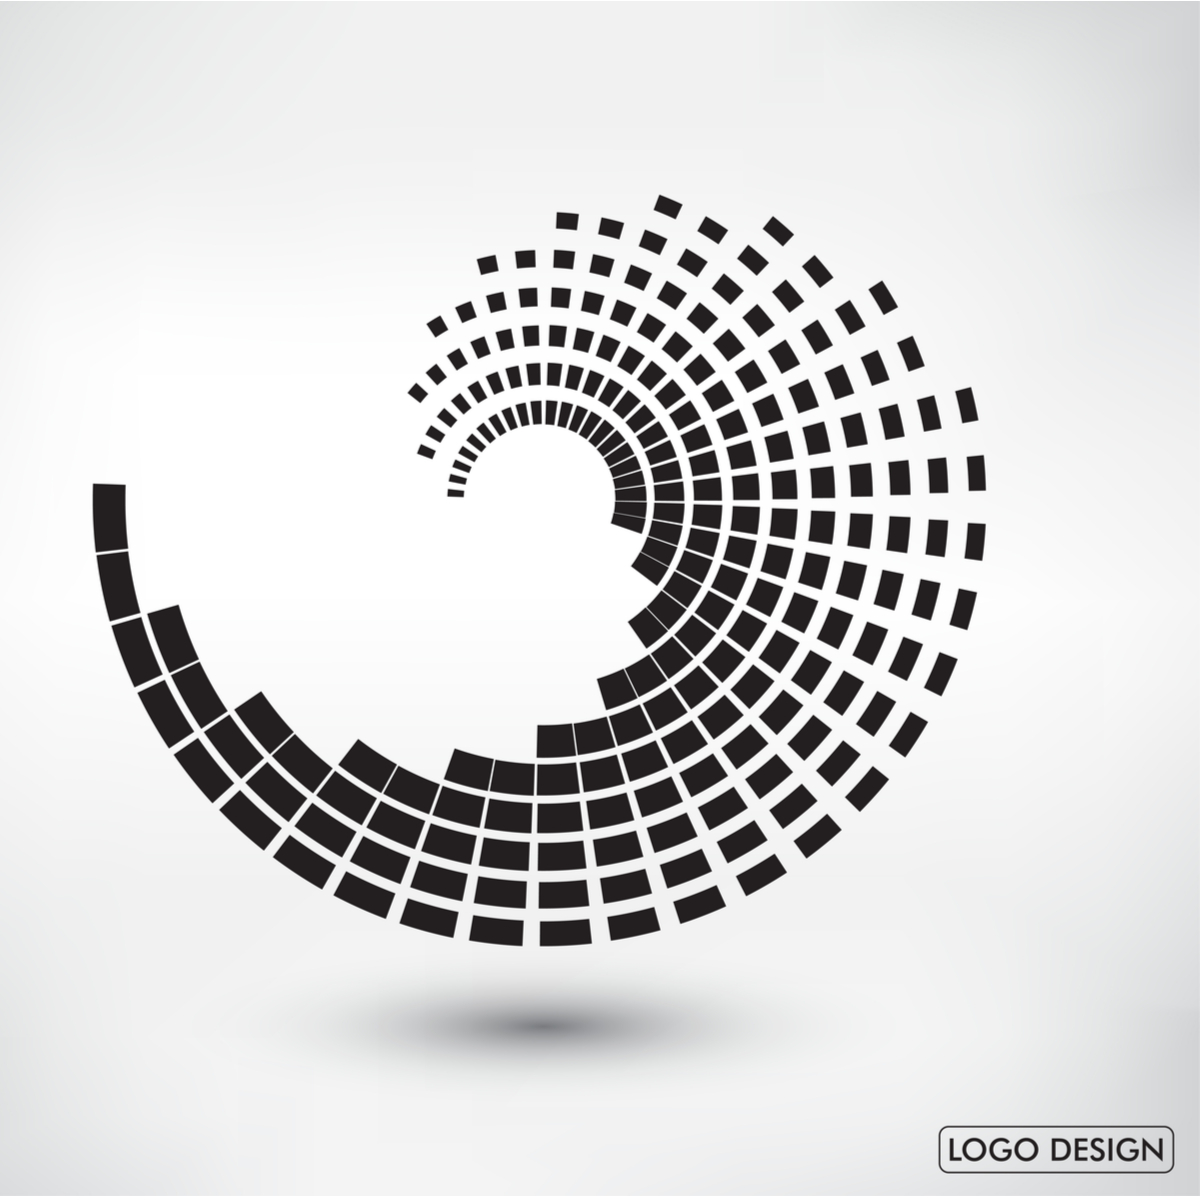 Logo Design Services In Chennai - Get Your Professional Logo